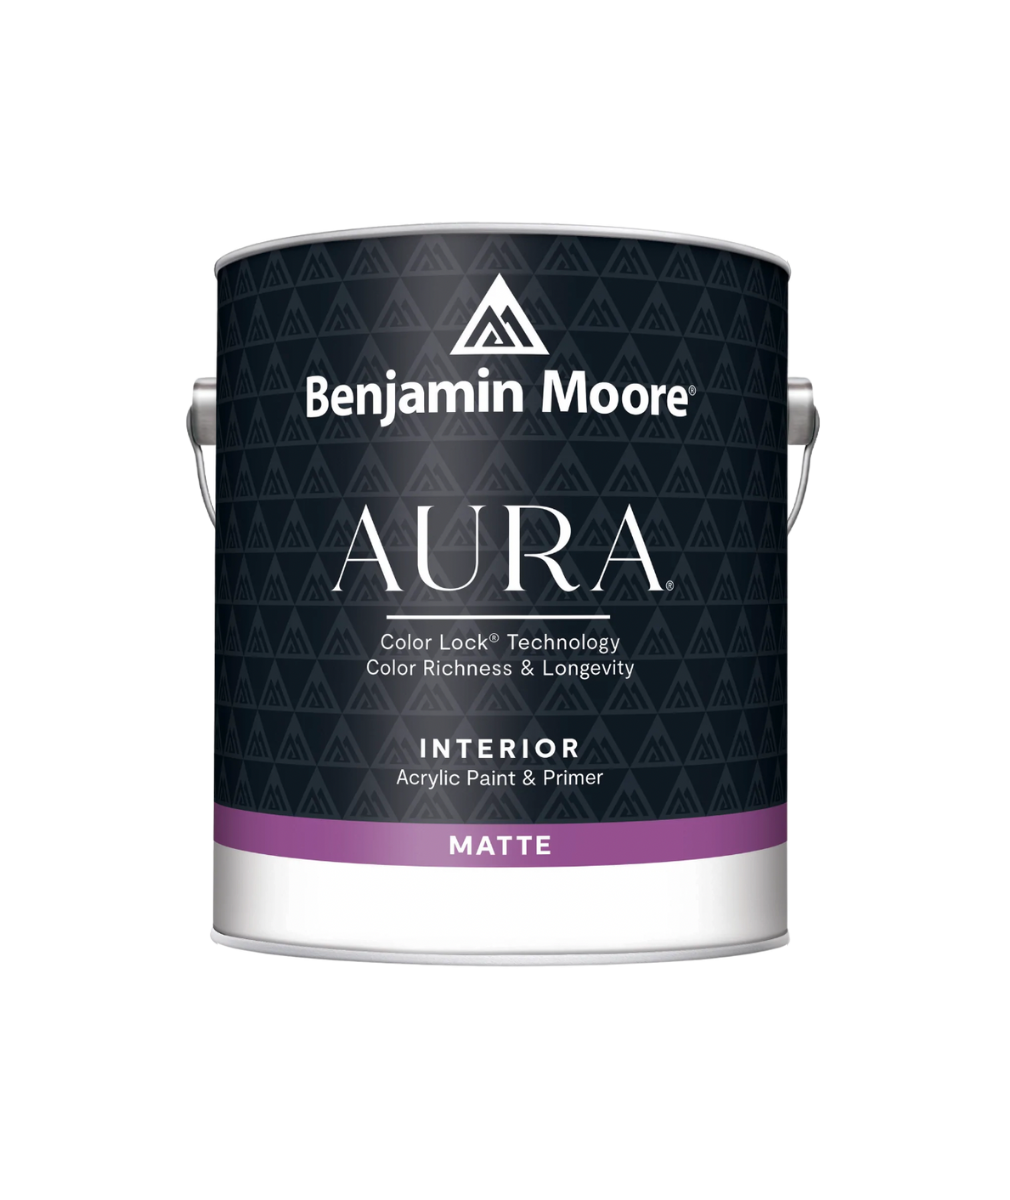 Benjamin Moore Matte Interior Paint available at JC Licht.